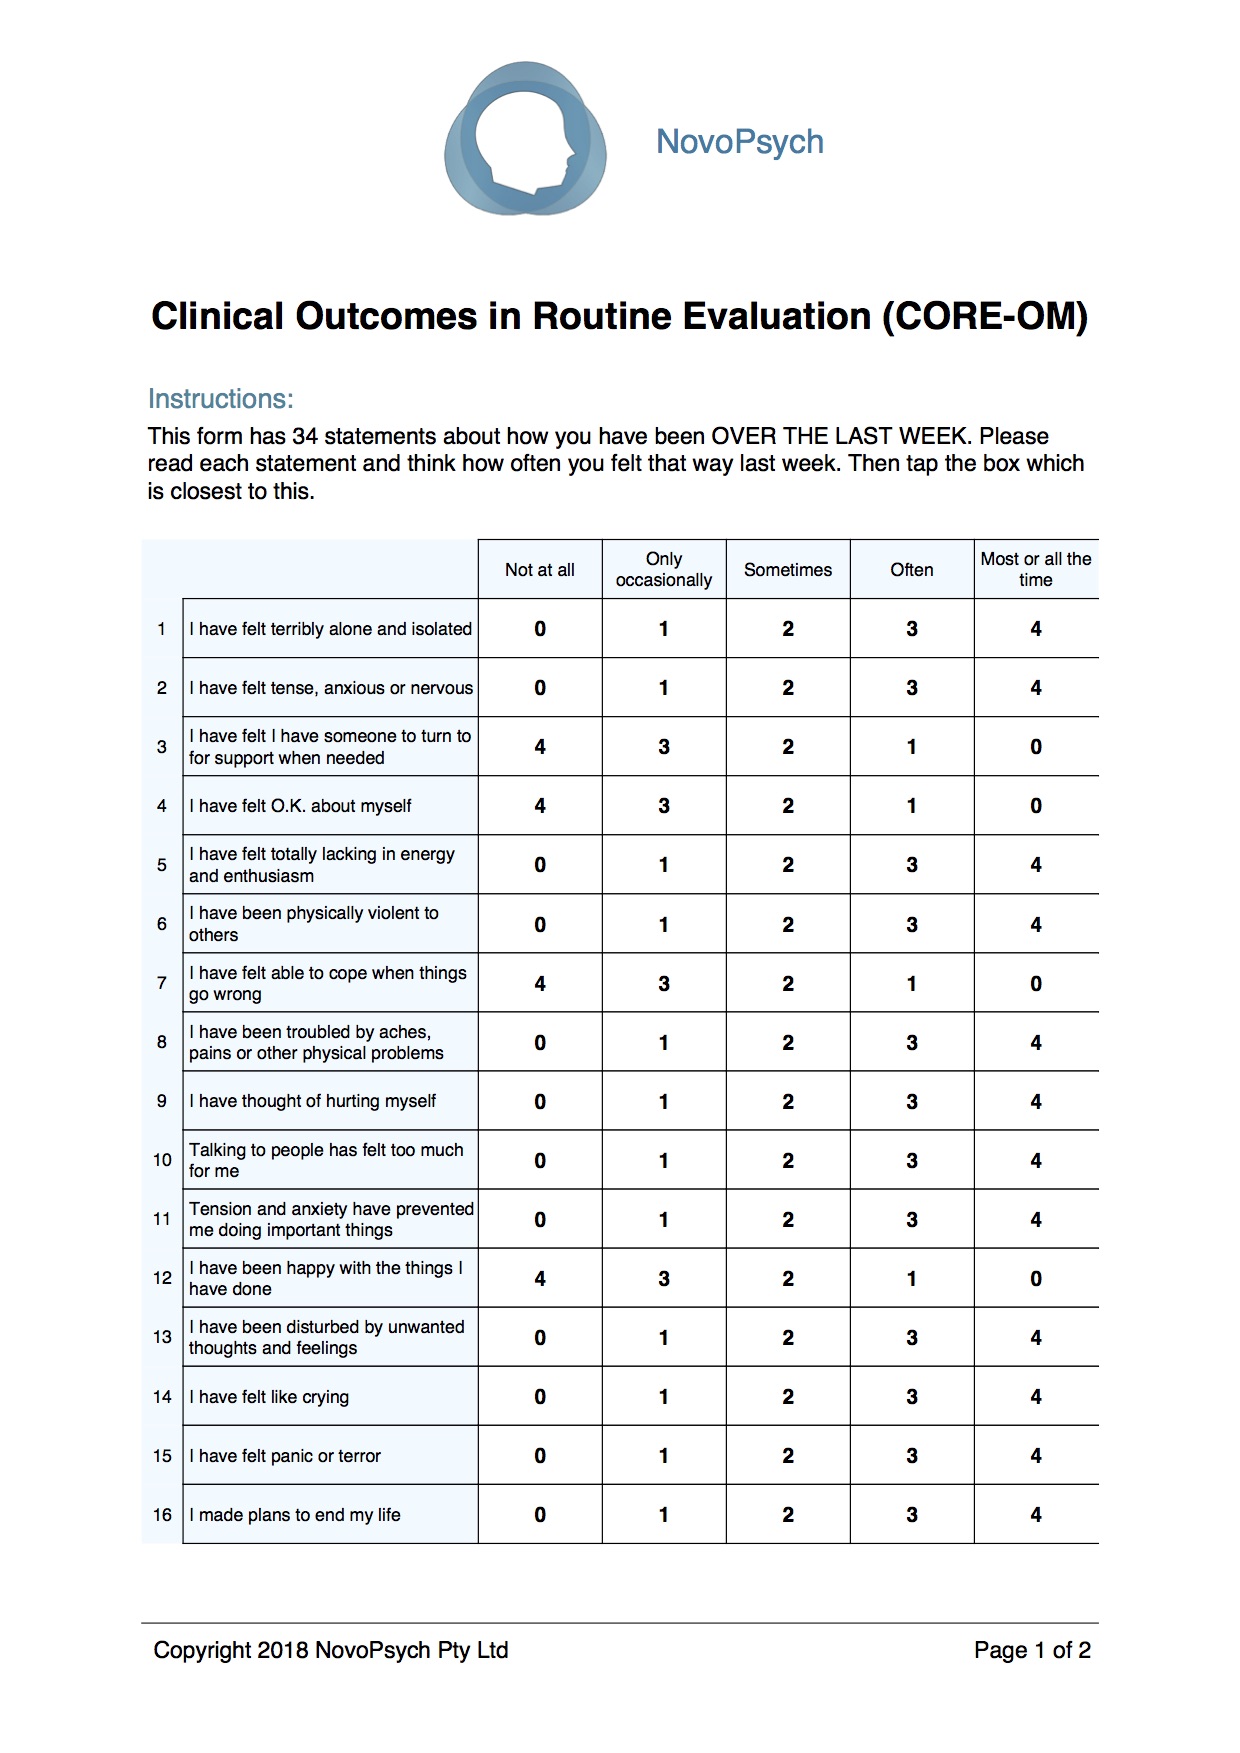 PDF] The derivation of a preference-based measure for people with common  mental health problems from the Clinical Outcomes in Routine Evaluation  Outcome Measure (CORE-OM)